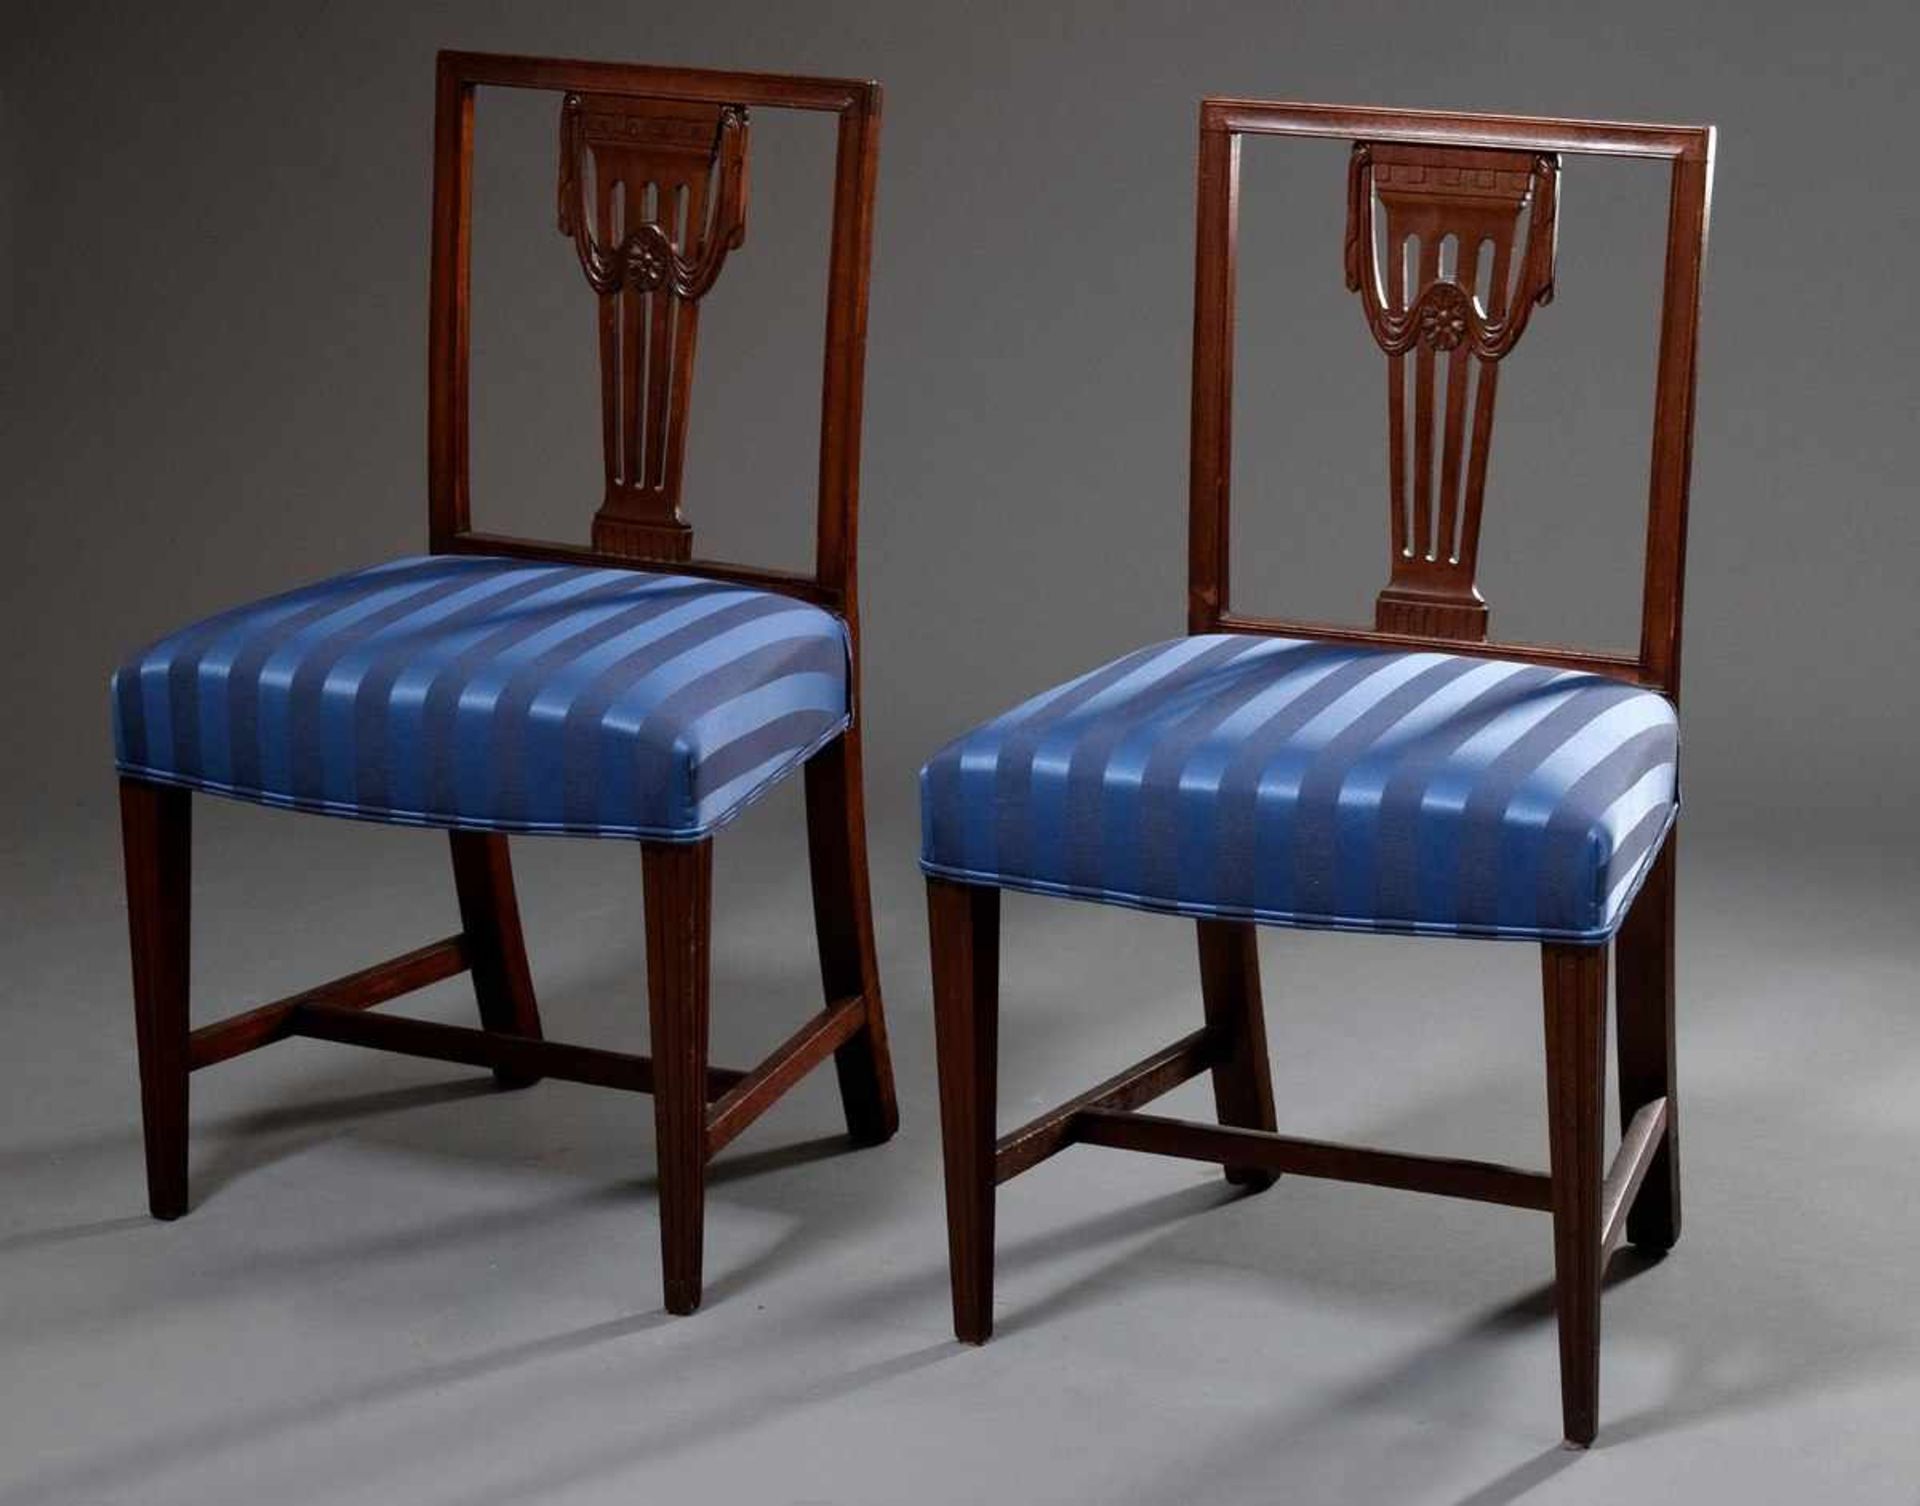 Pair of classicist chairs with "vase motif" in the backrest and blue cover, mahogany, h. 47/90cmPaar